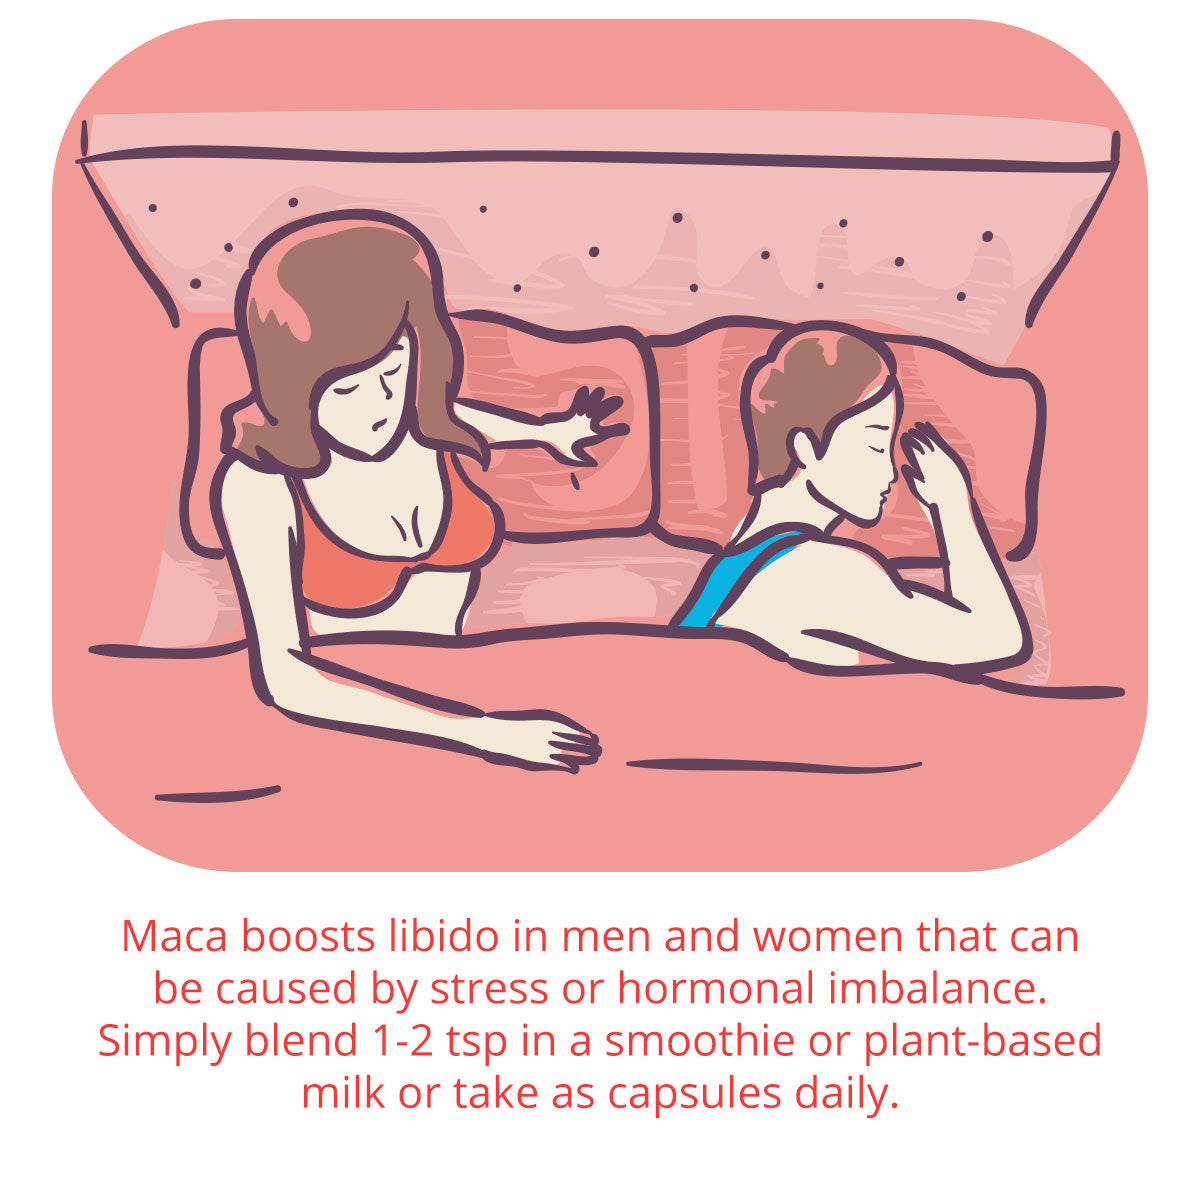 Low Sex Drive? Maca Can Help Boost Your